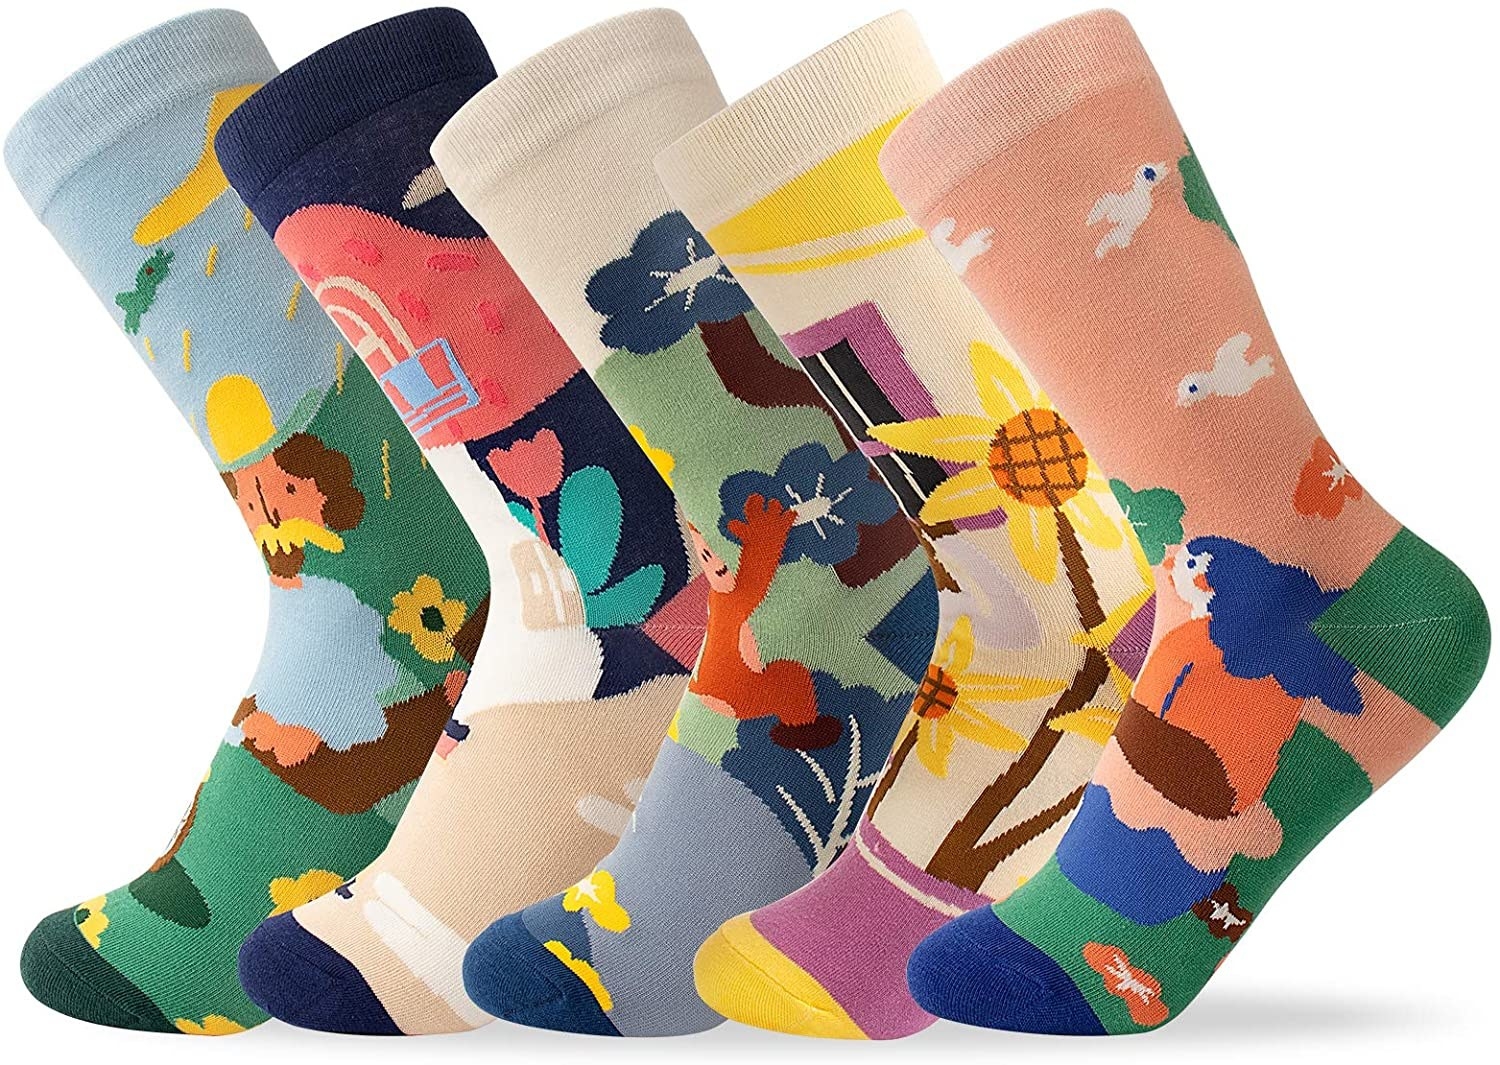 cute socks with chunky illustrations of monkeys, flowers, and more